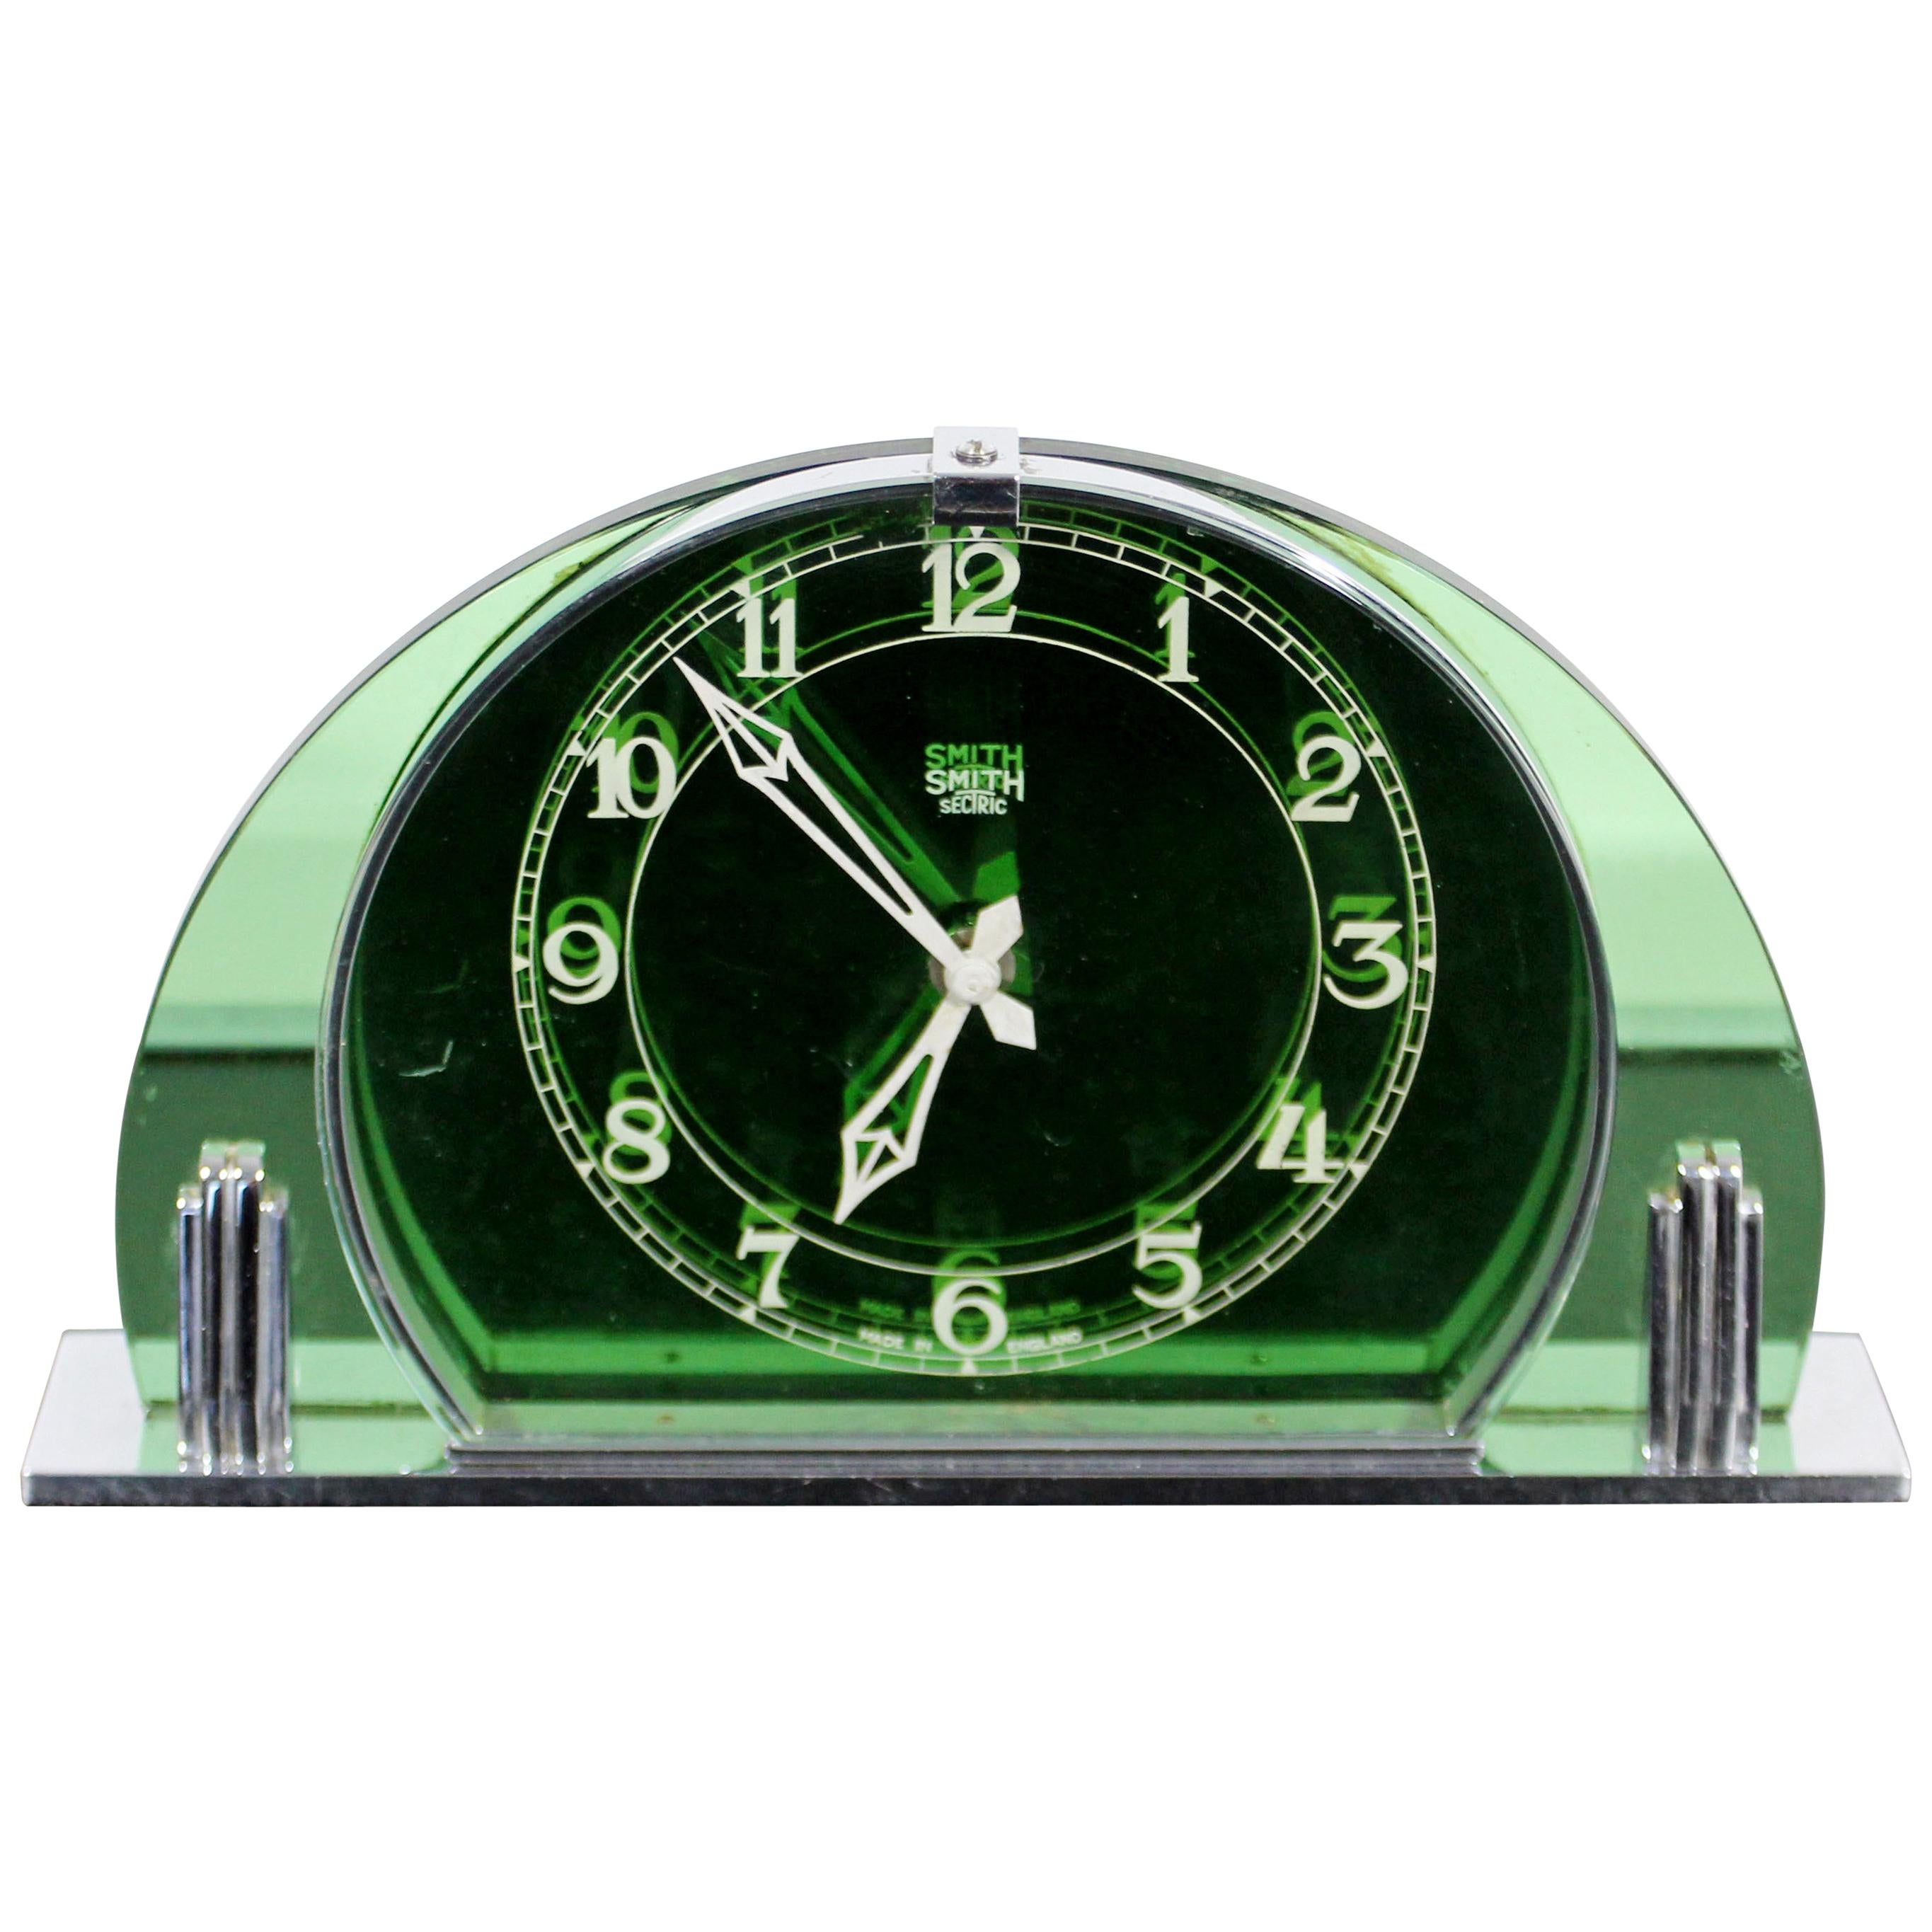 Art Deco Smith Sectric Green Glass and Chrome Mantle Shelf Clock Made in England